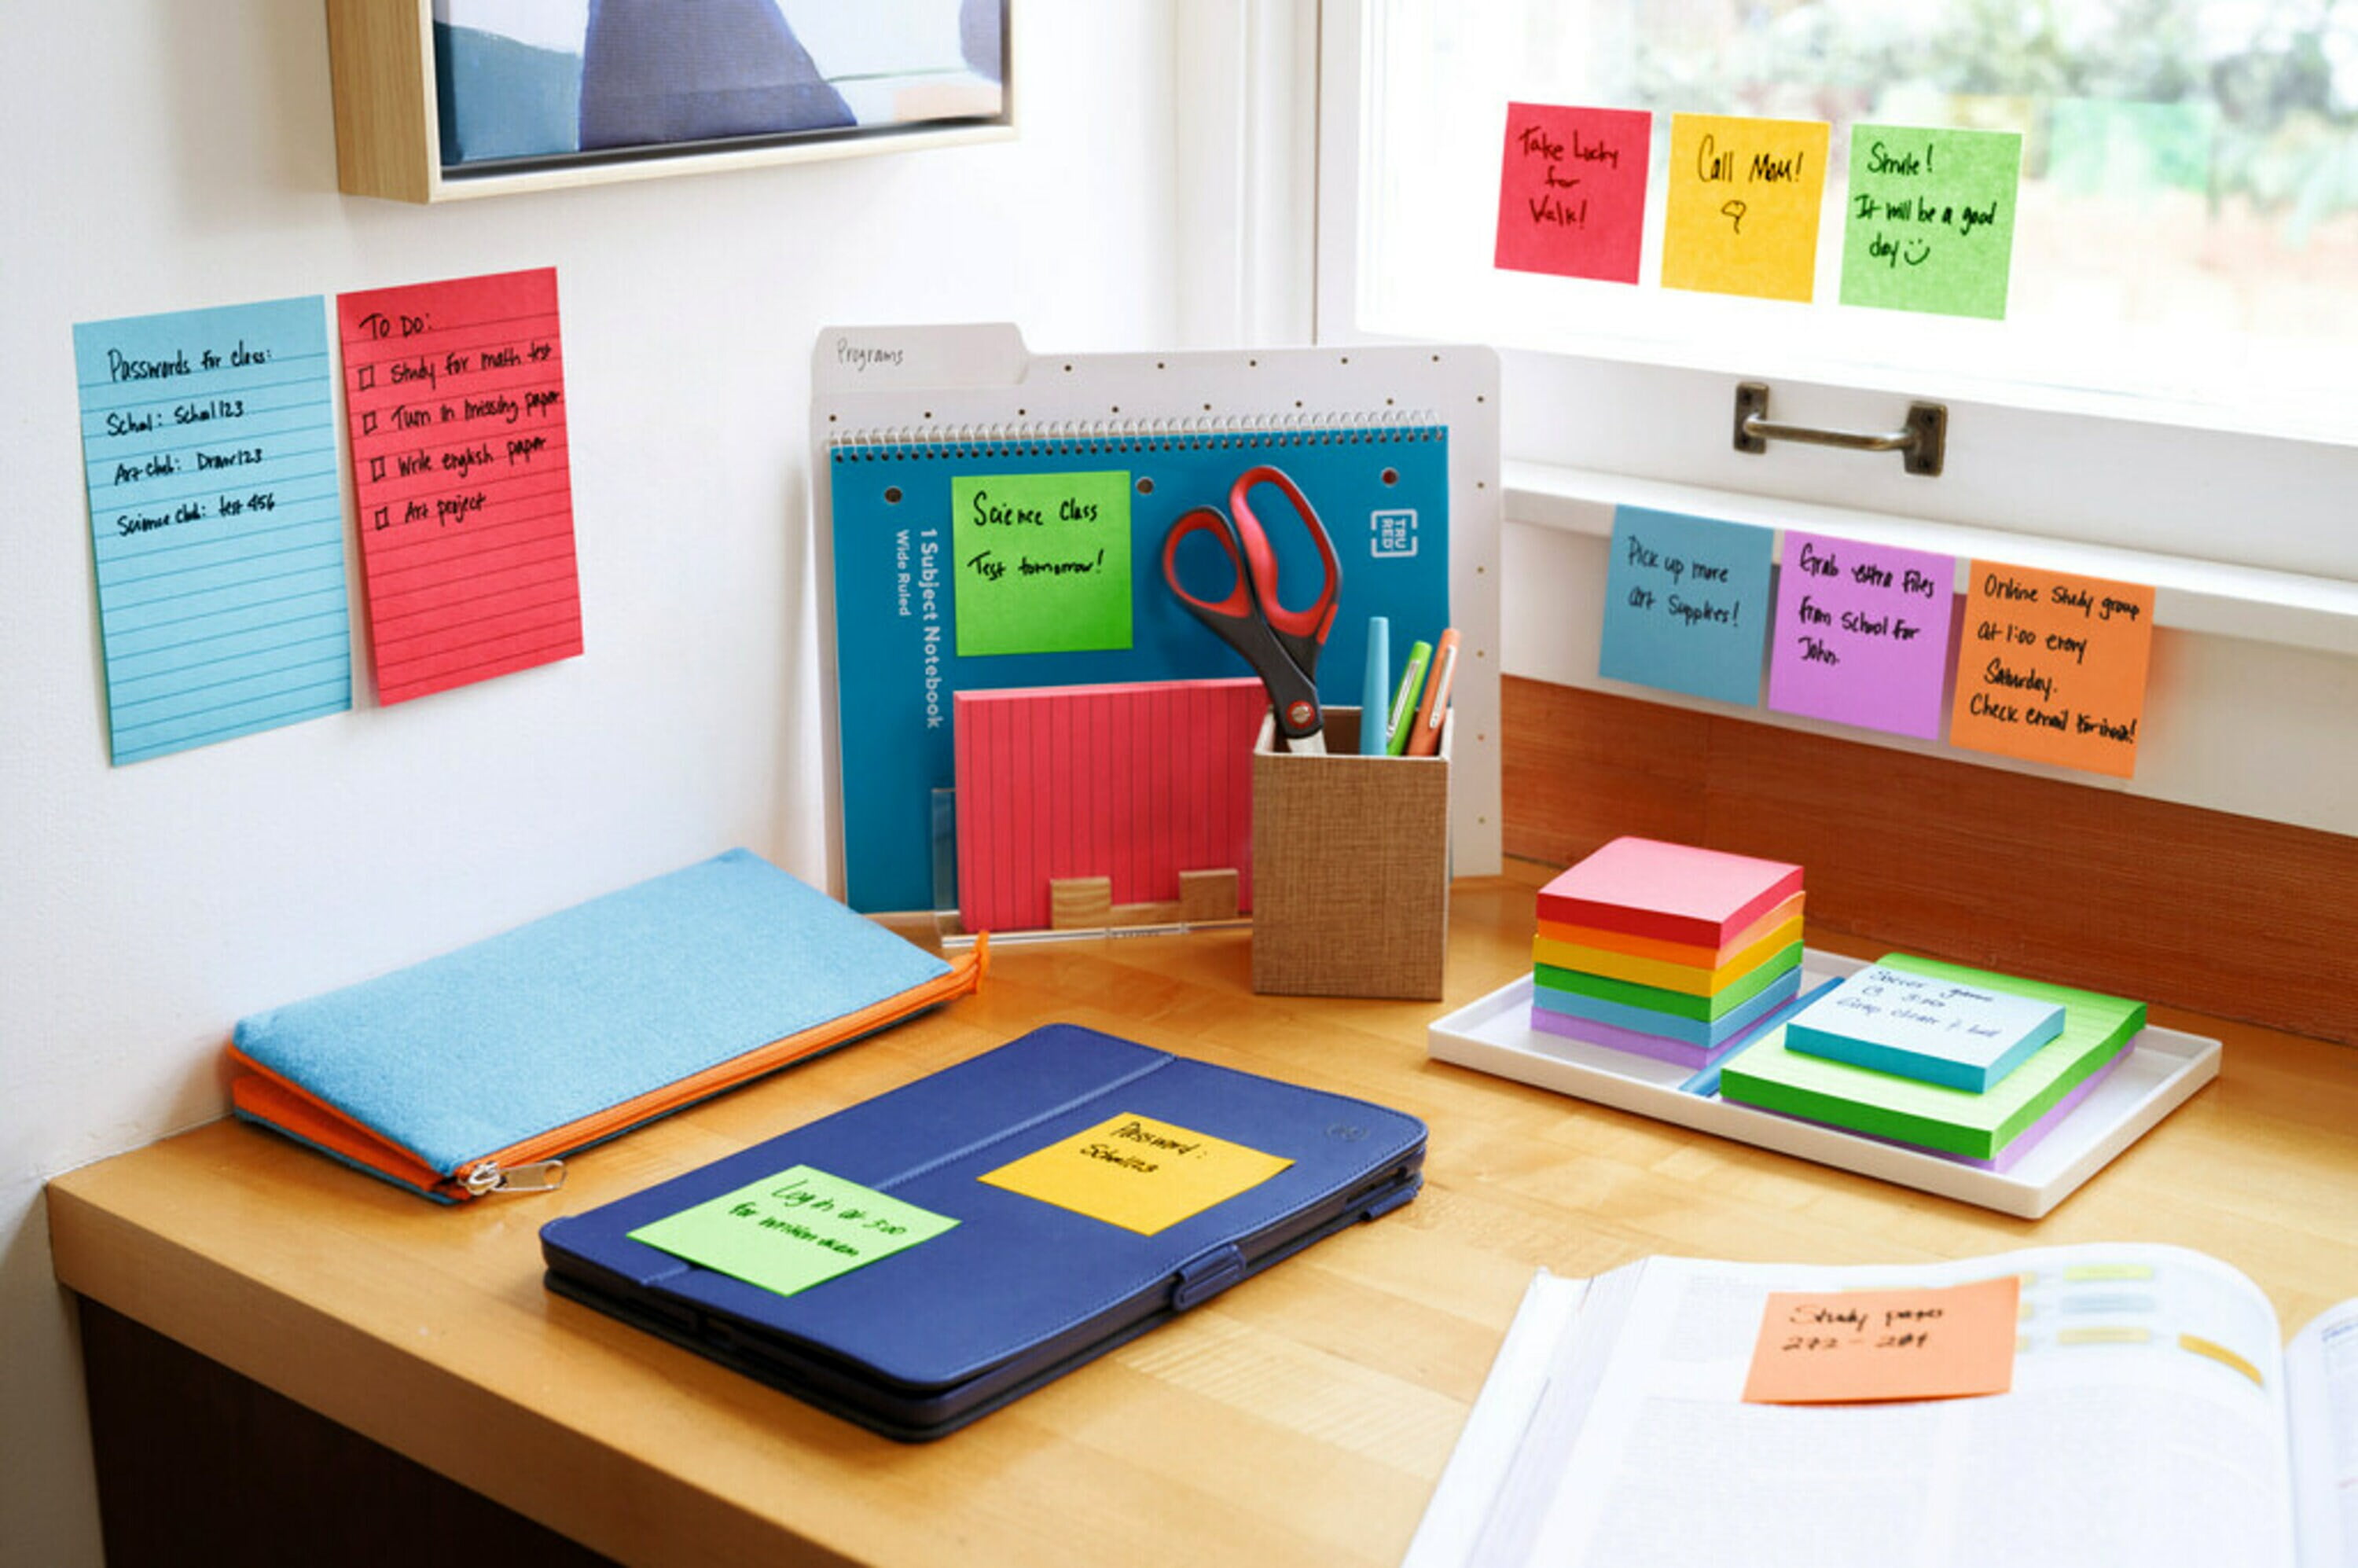 3M Post-it® Pads in Playful Primary Collection Colors